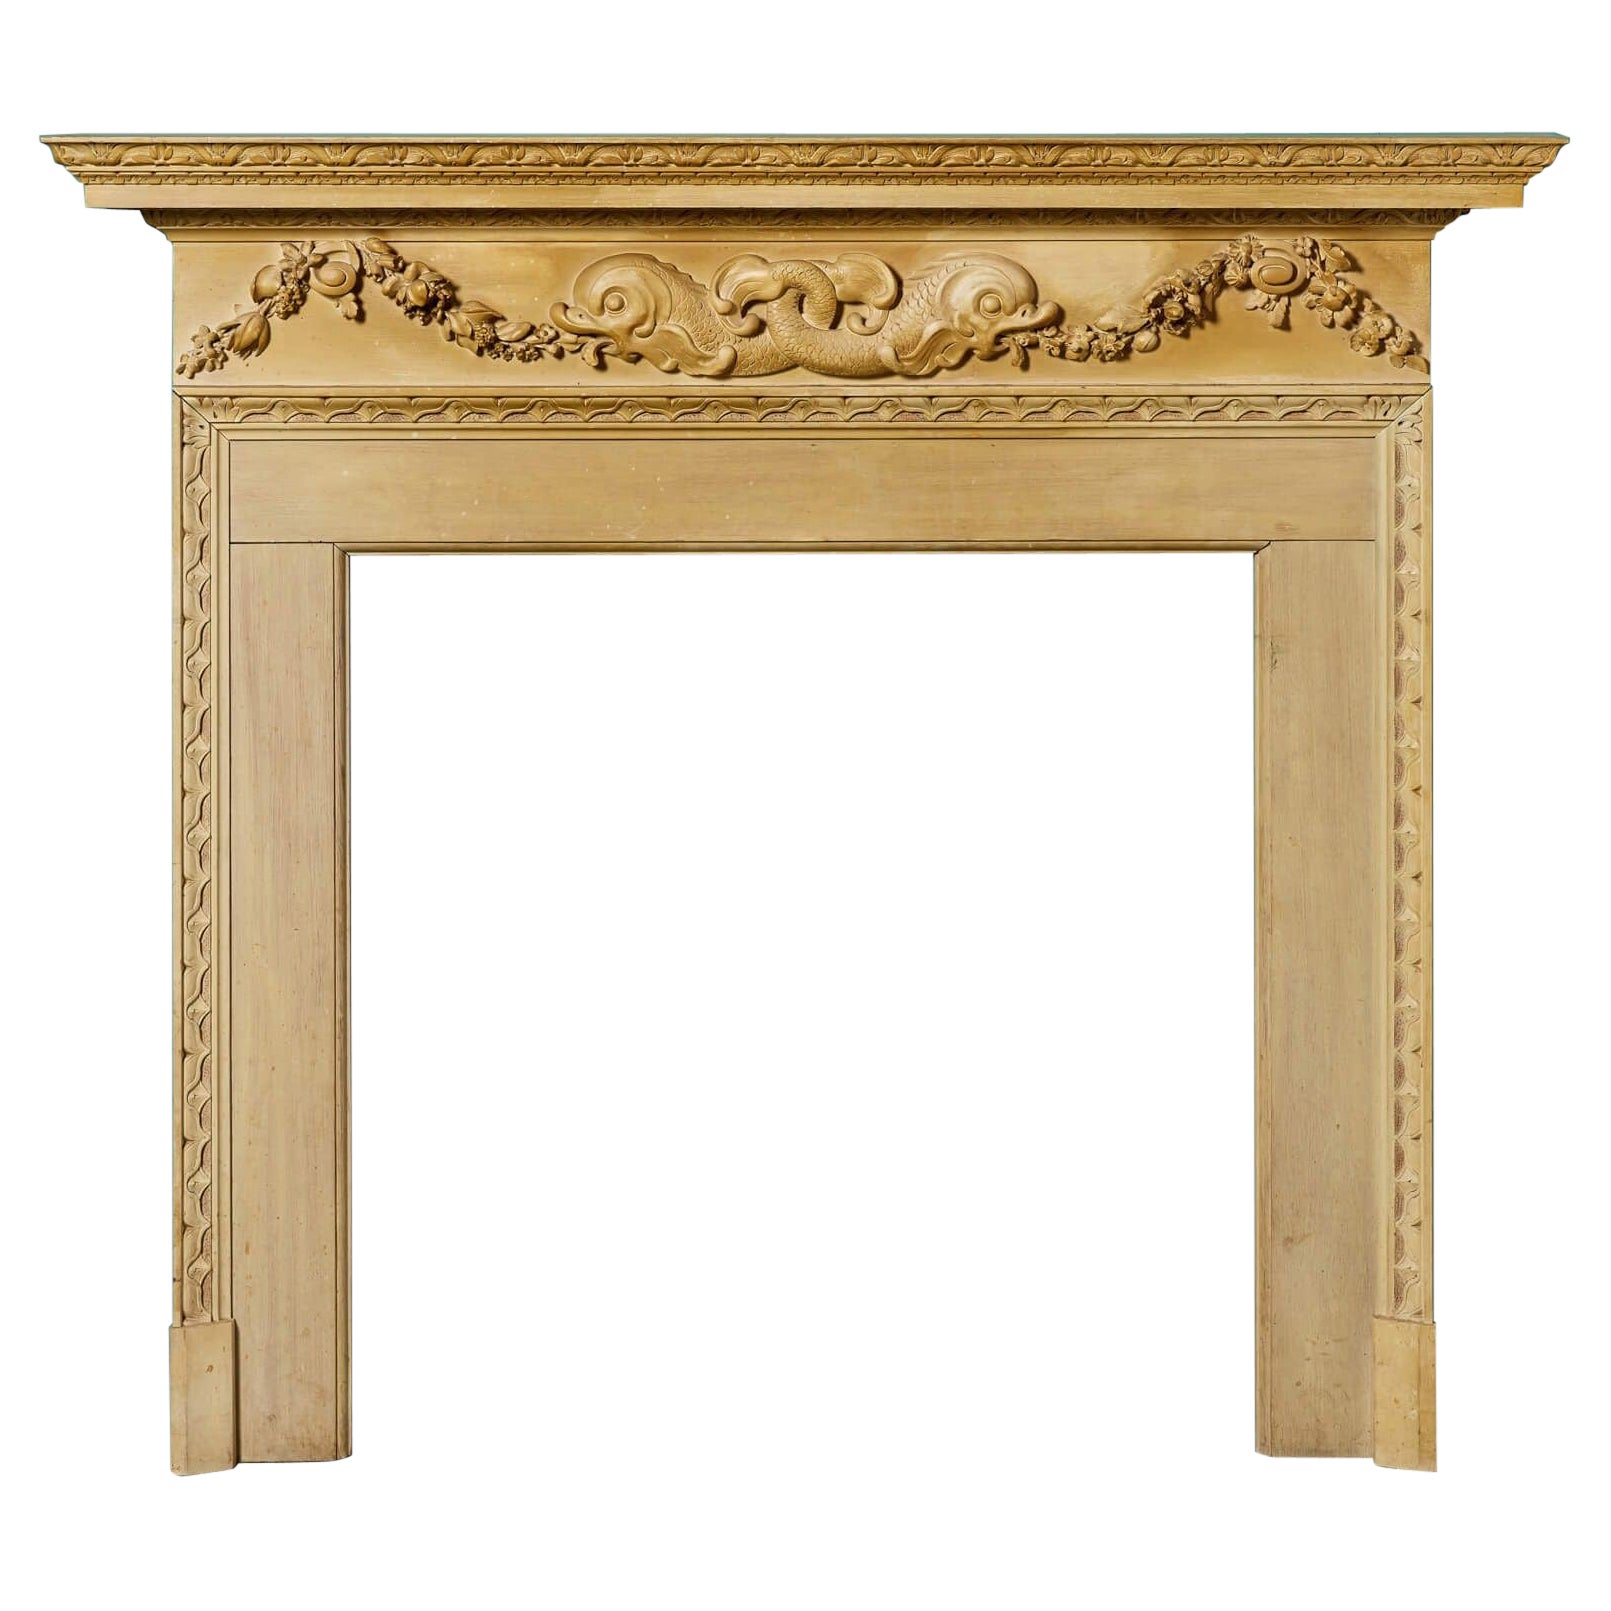 Reclaimed Neoclassical Style Fireplace with Dolphin Frieze For Sale